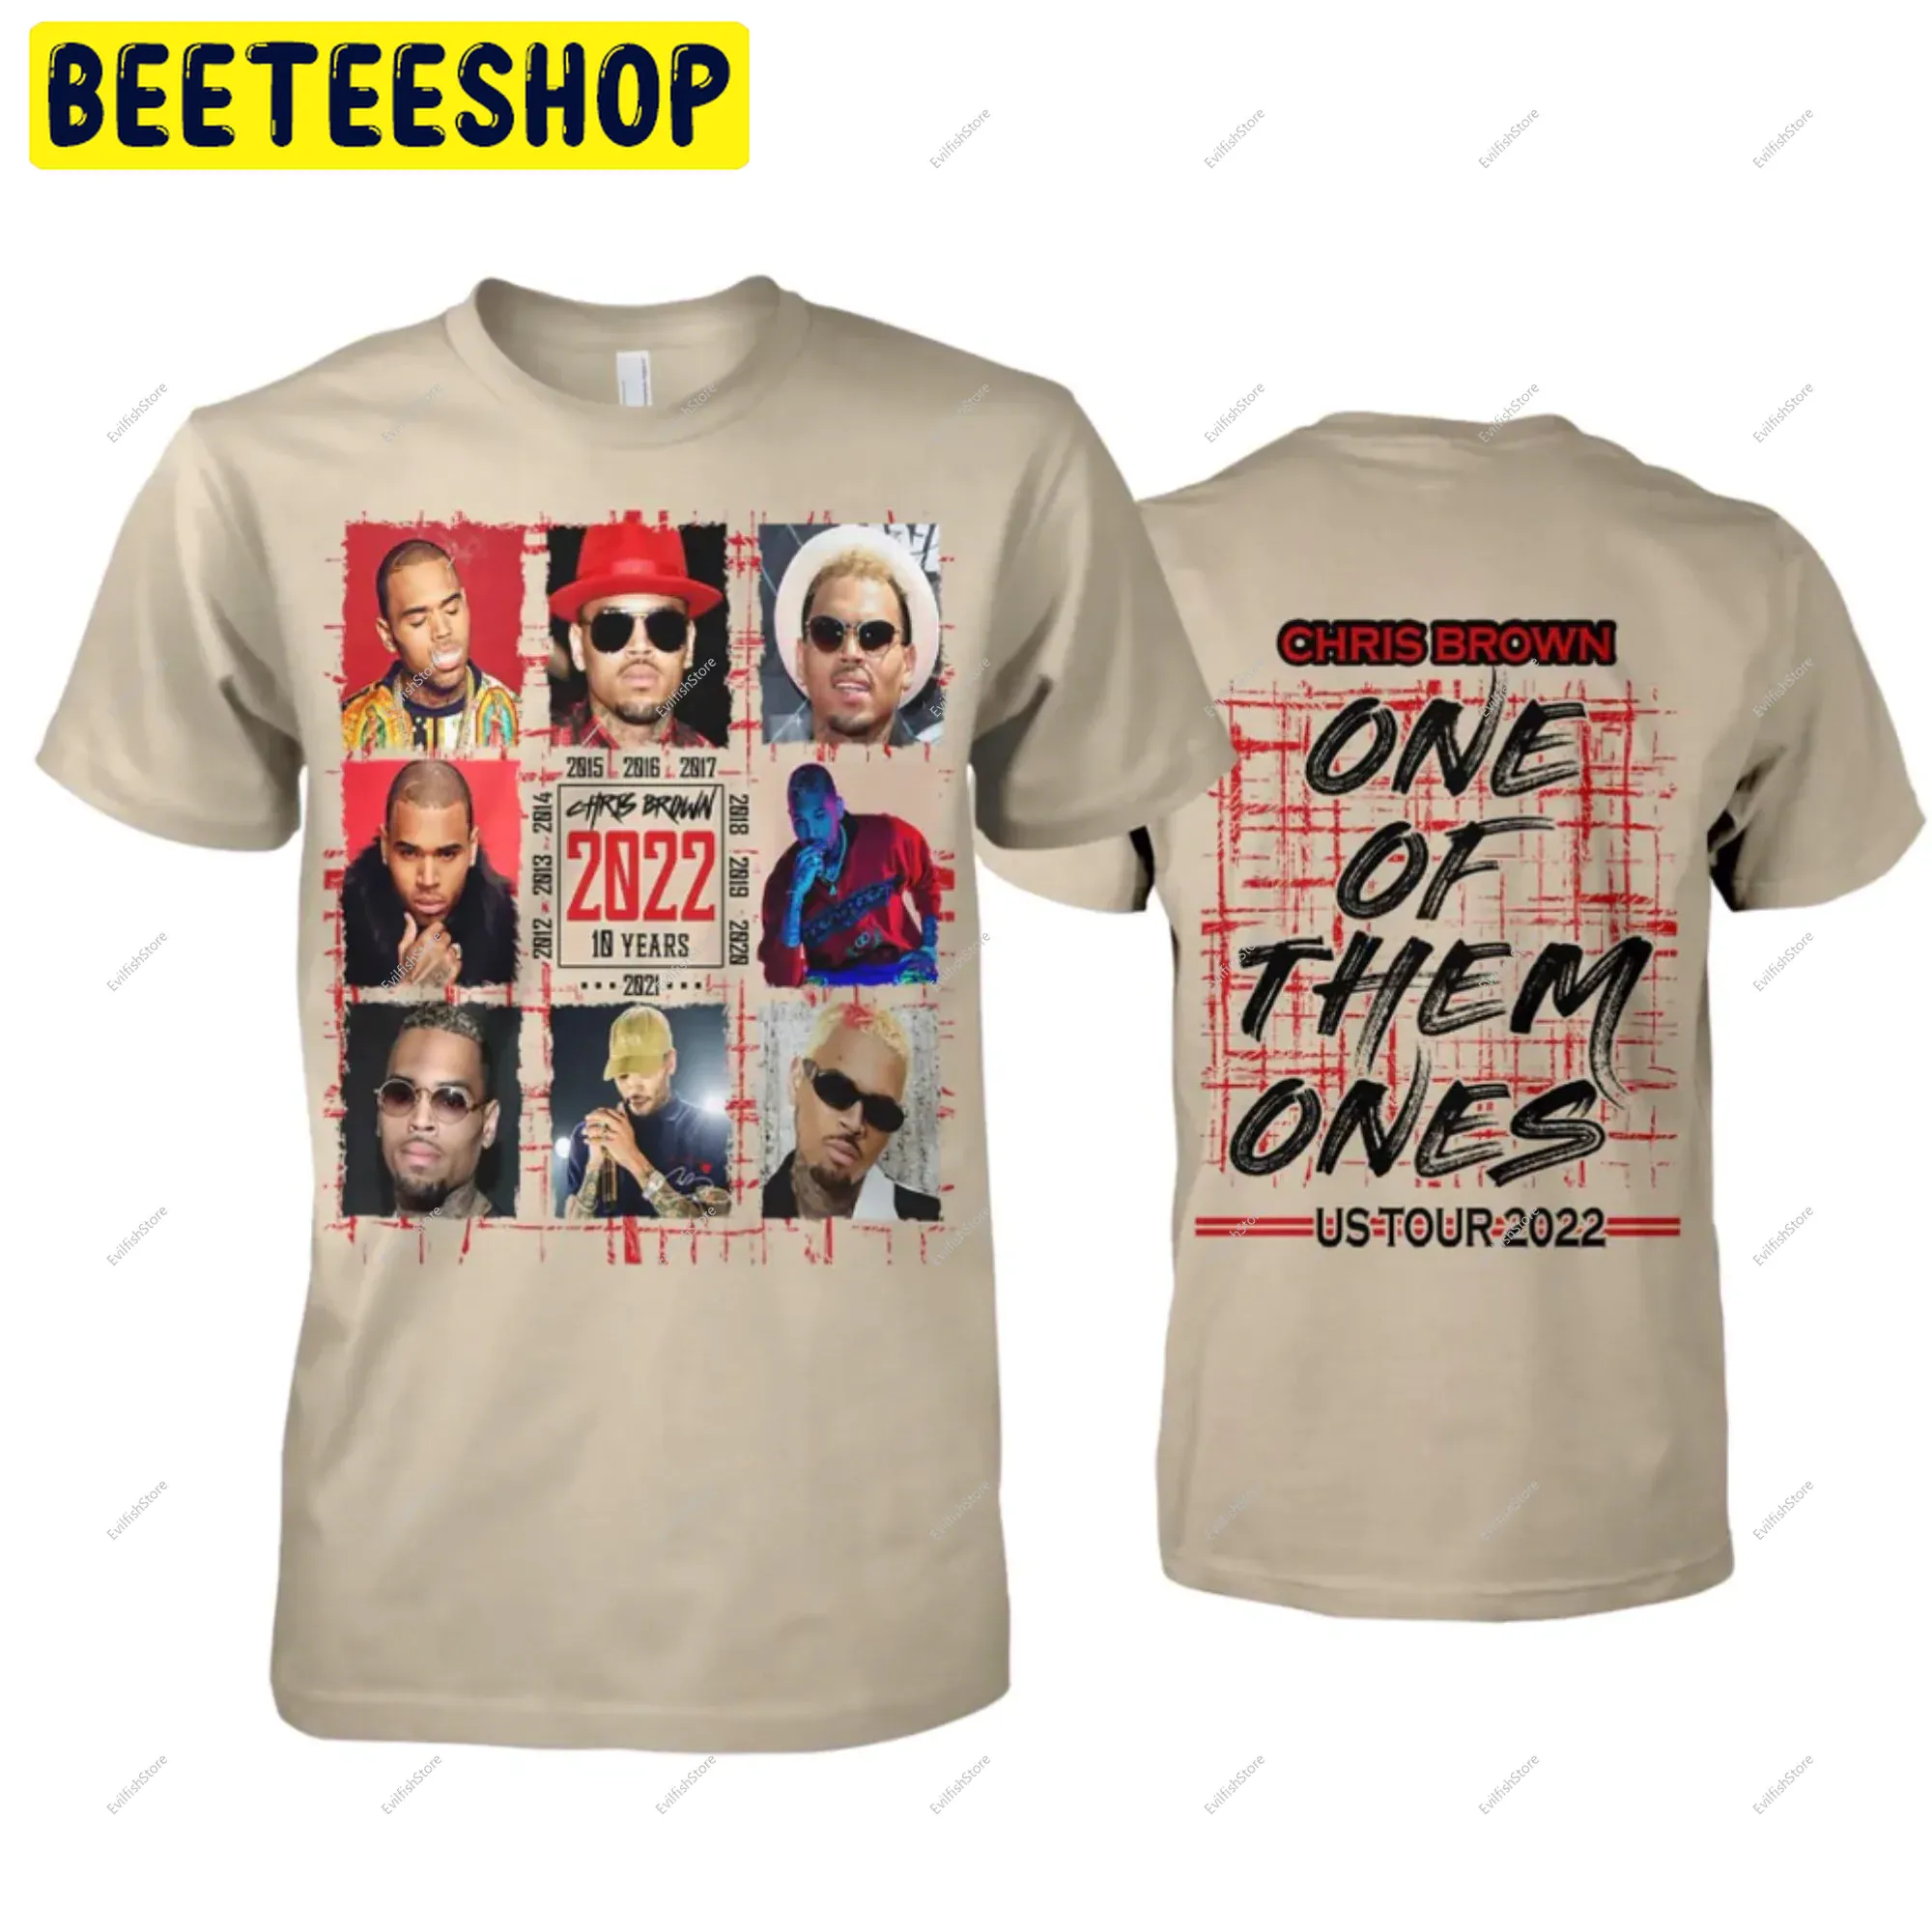 10 Years Chris Brown One Of Them Ones Tour 2022 Double Sided Unsiex T-Shirt